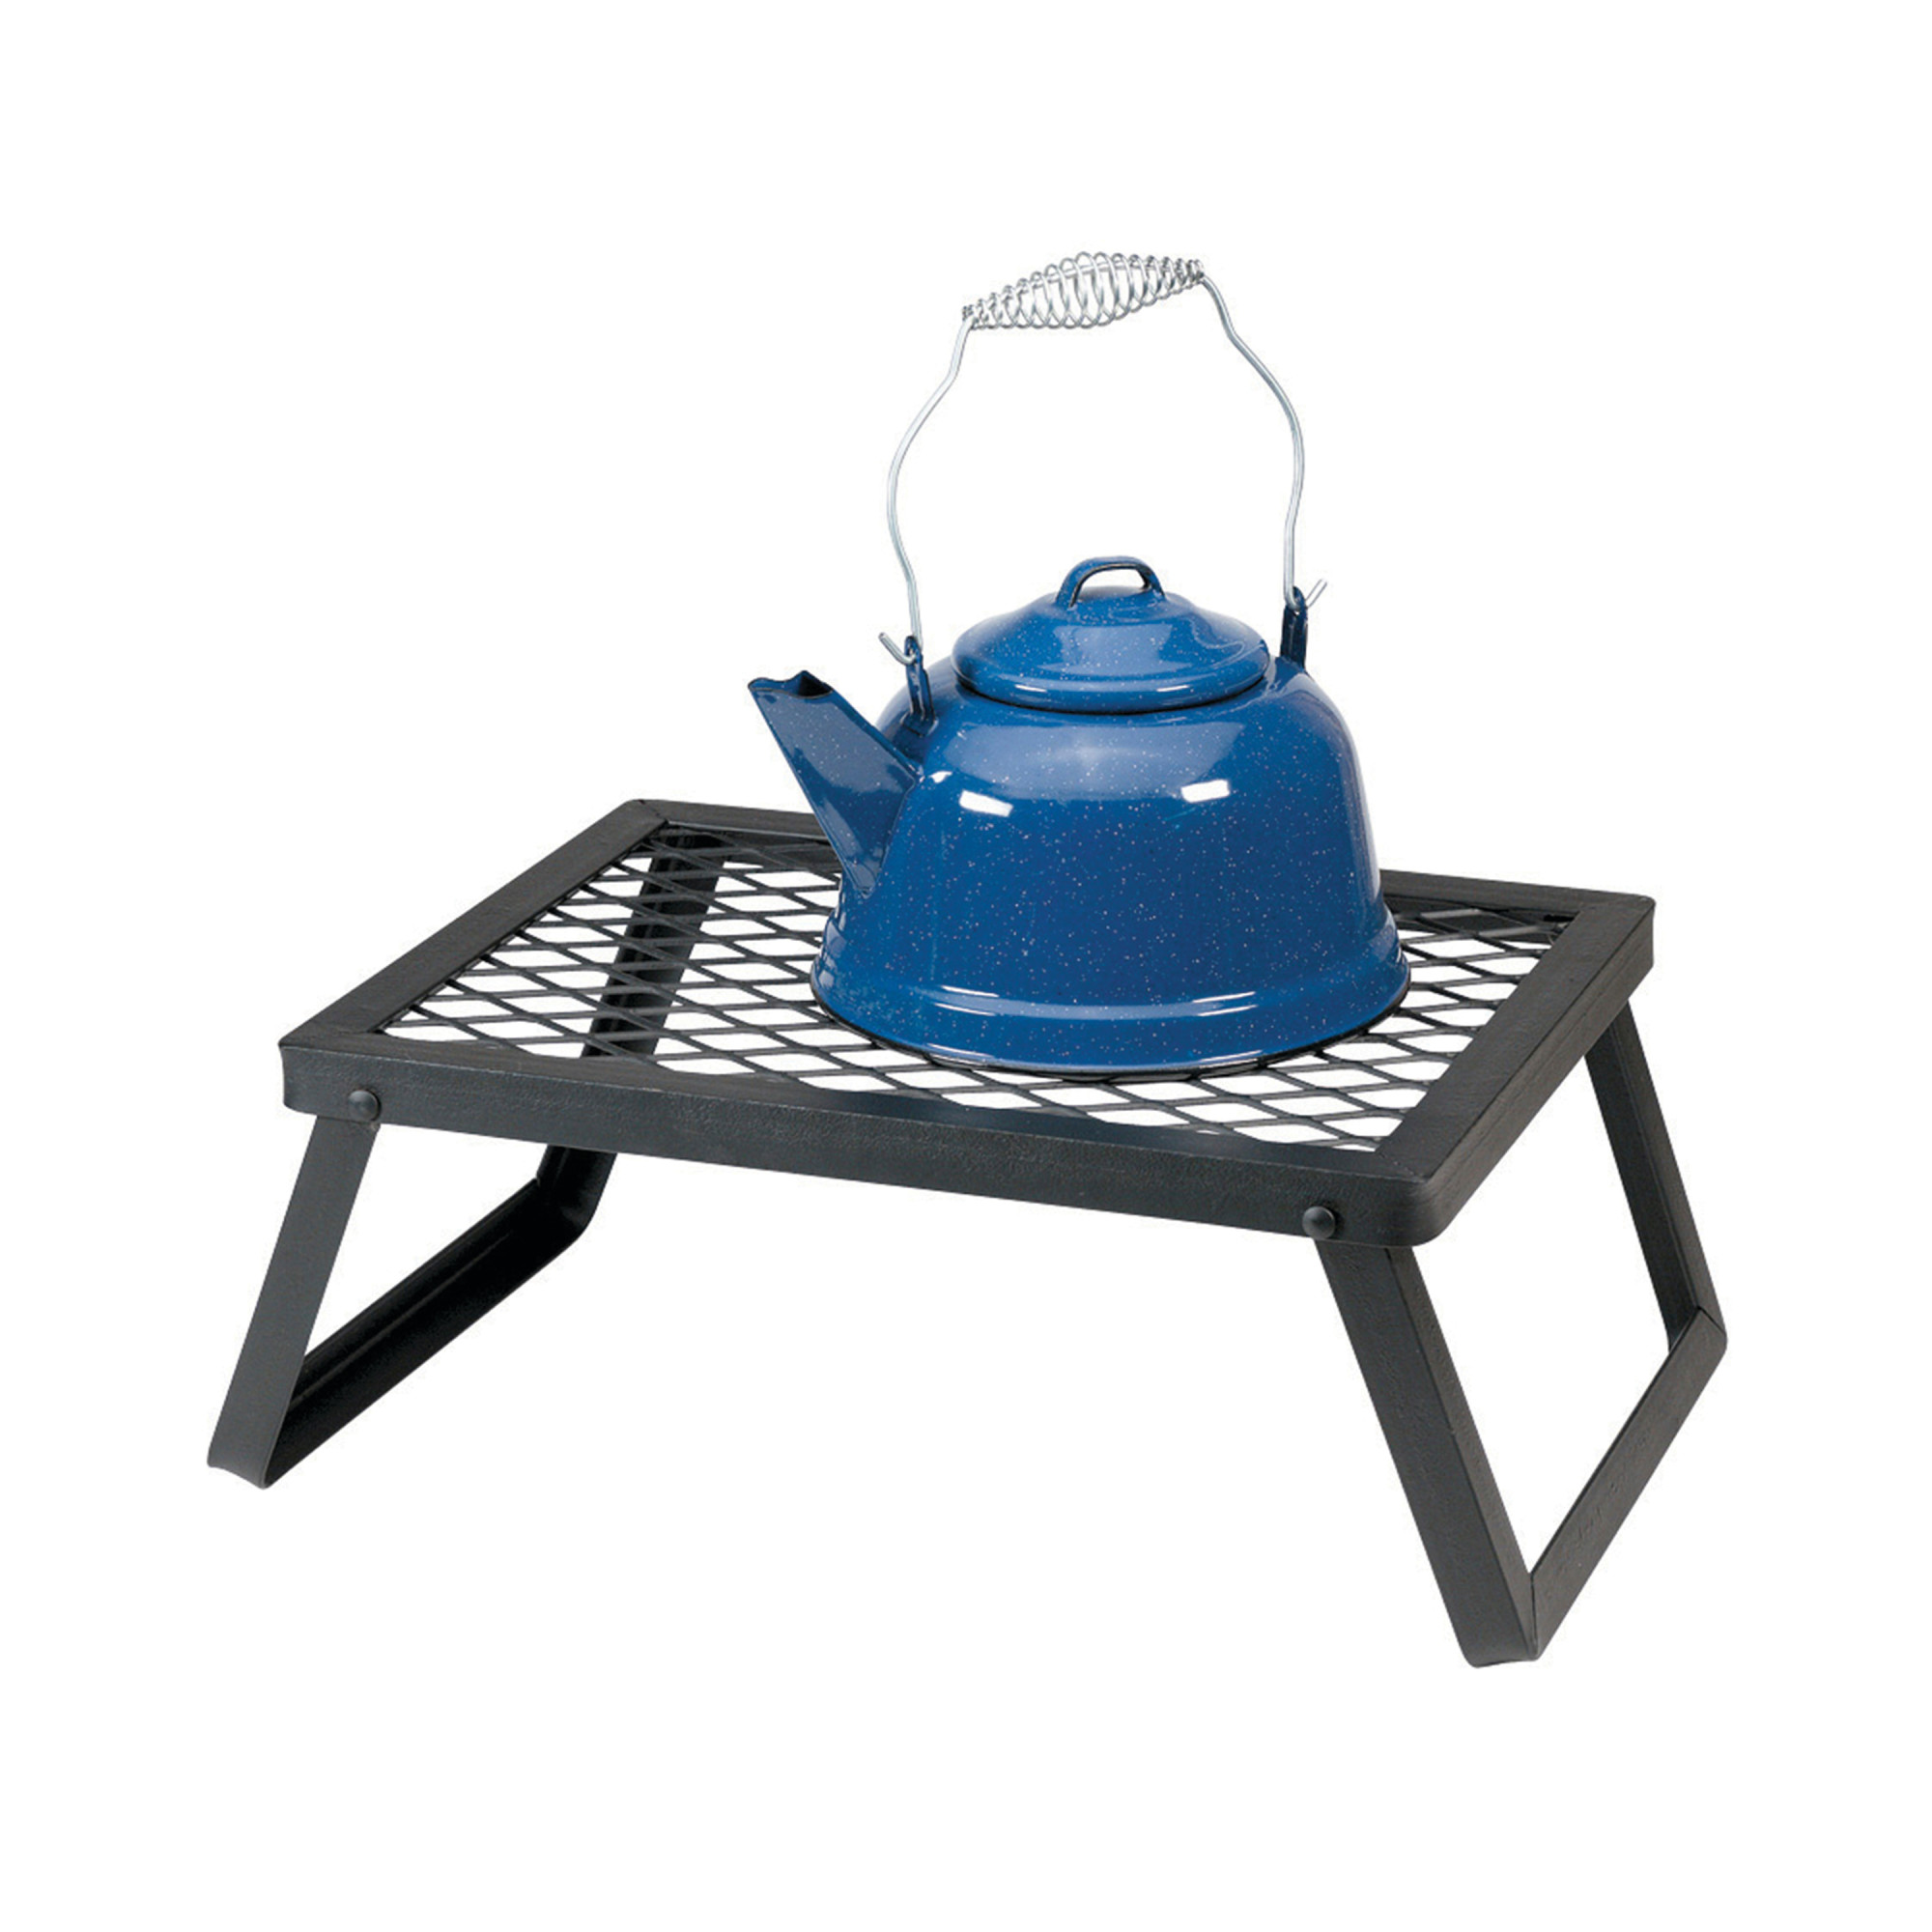 Stansport Heavy-Duty Camp Grill - Small - Campfire - Charcoal Wood -  Model 614-1216 - image 1 of 3